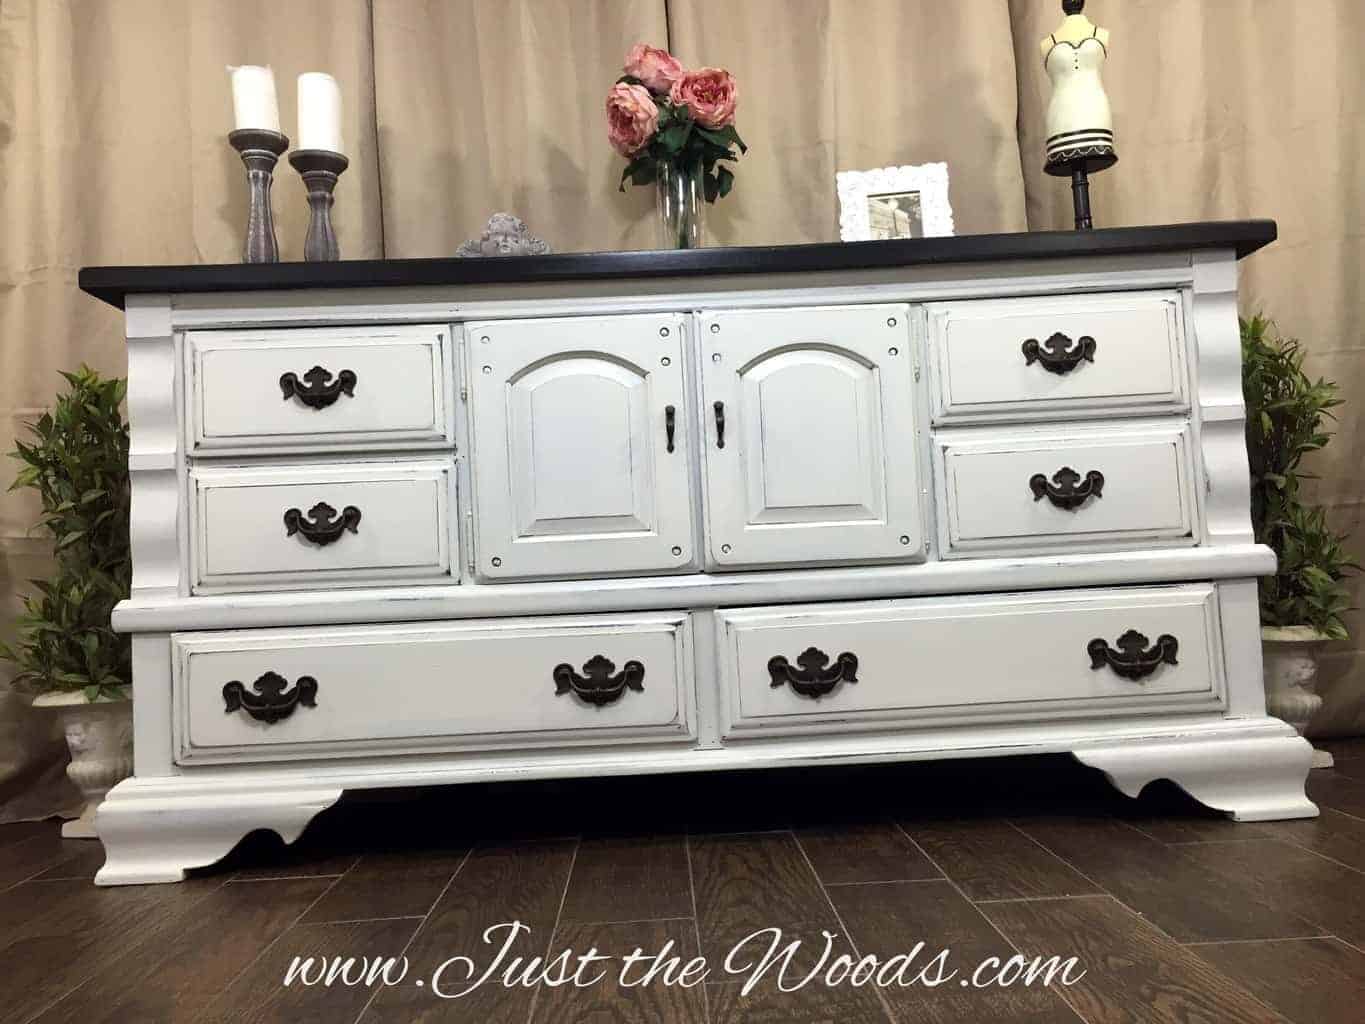 How To Paint A Distressed White Dresser, Shabby Chic White Dresser